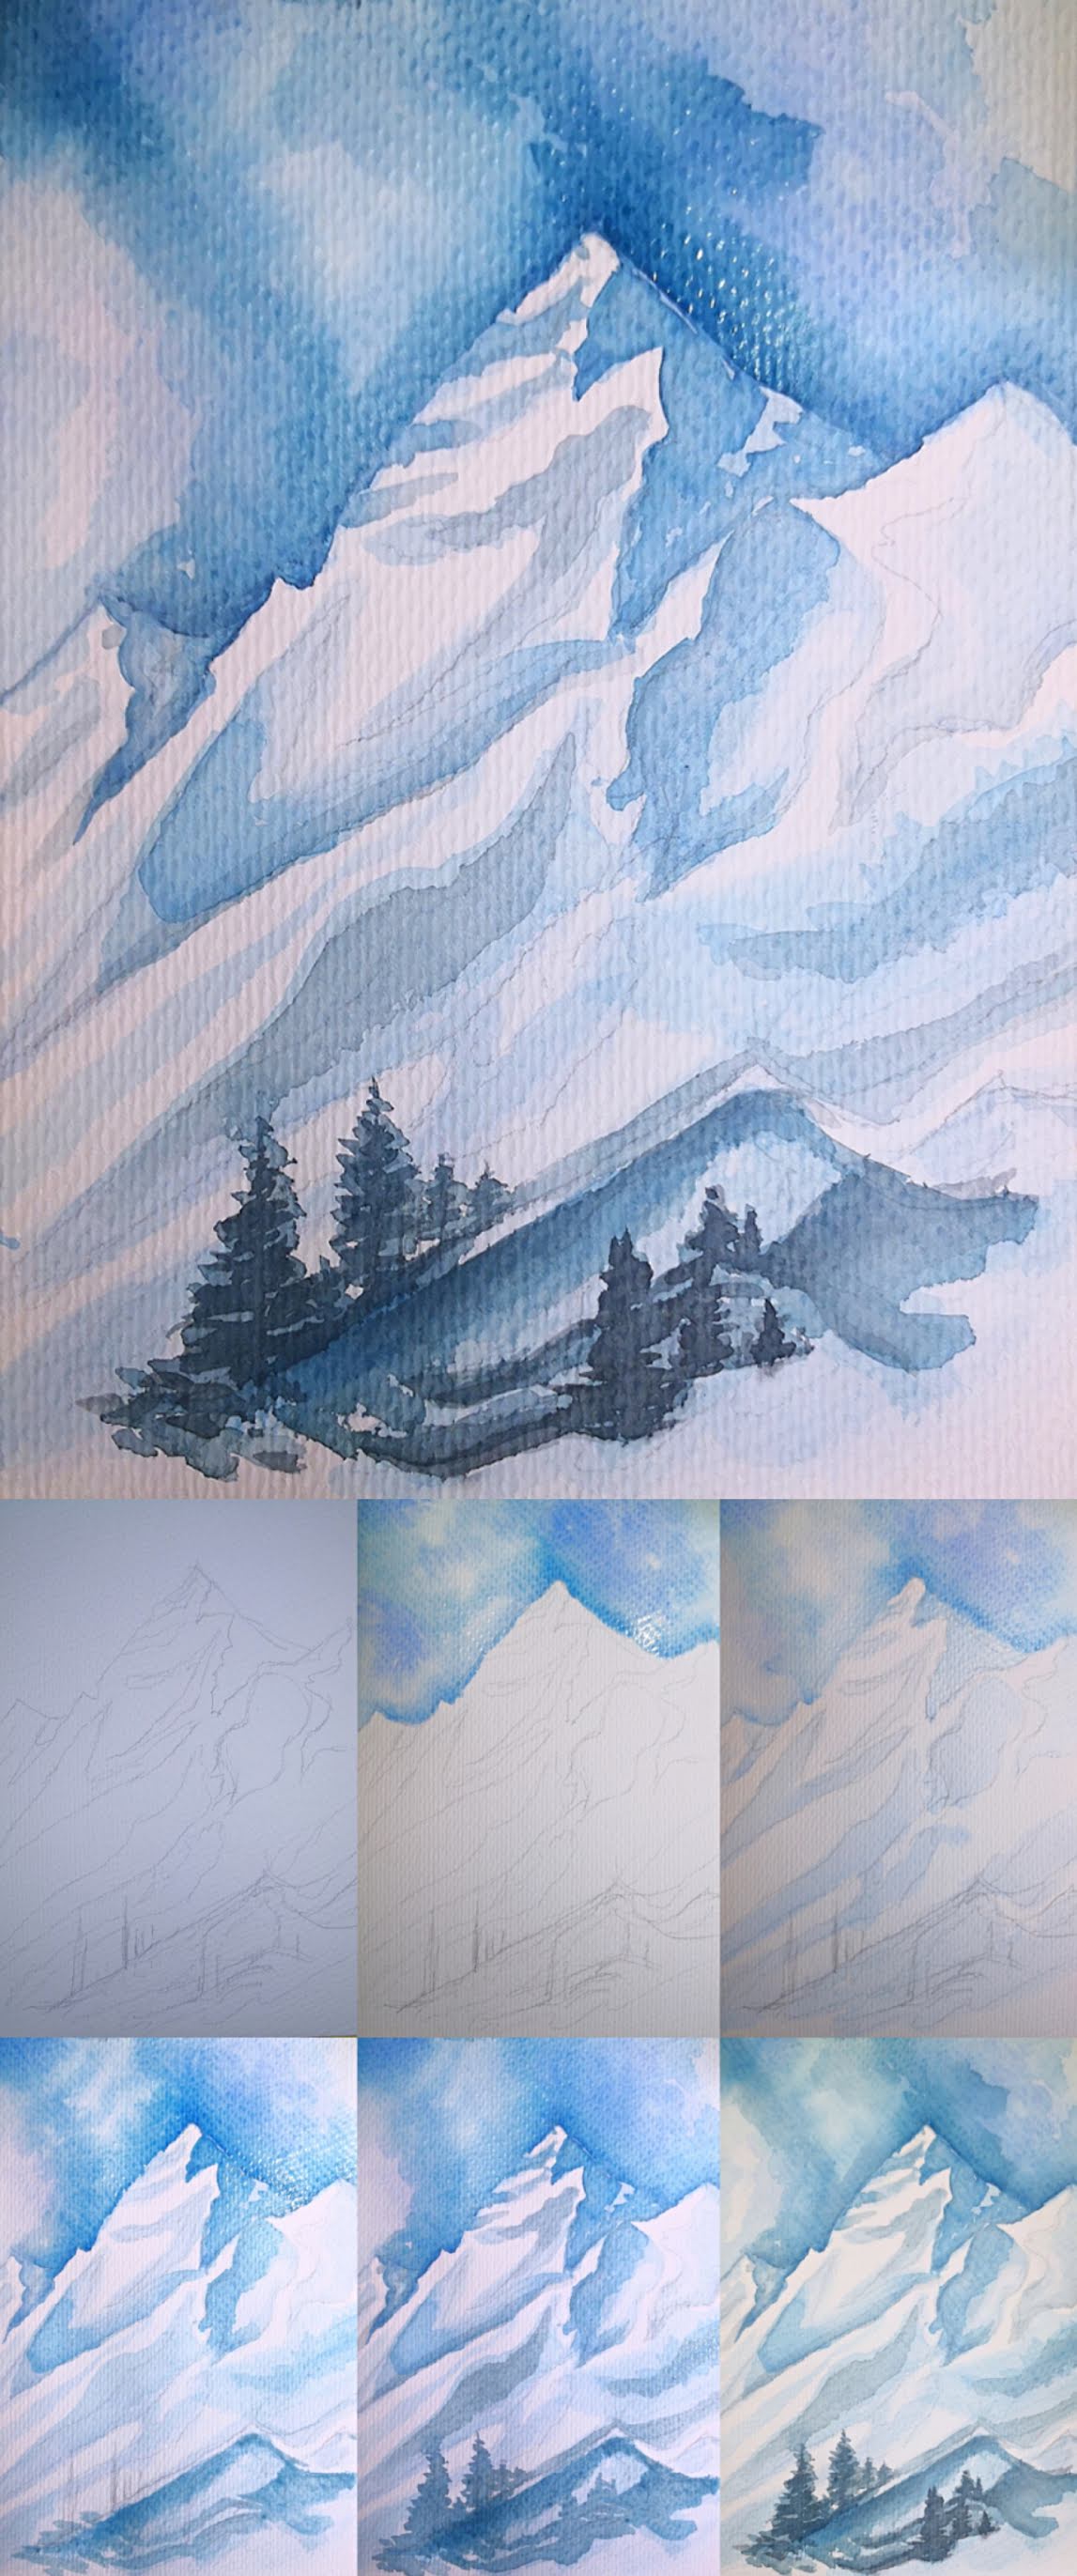 2 How to draw snow mountains